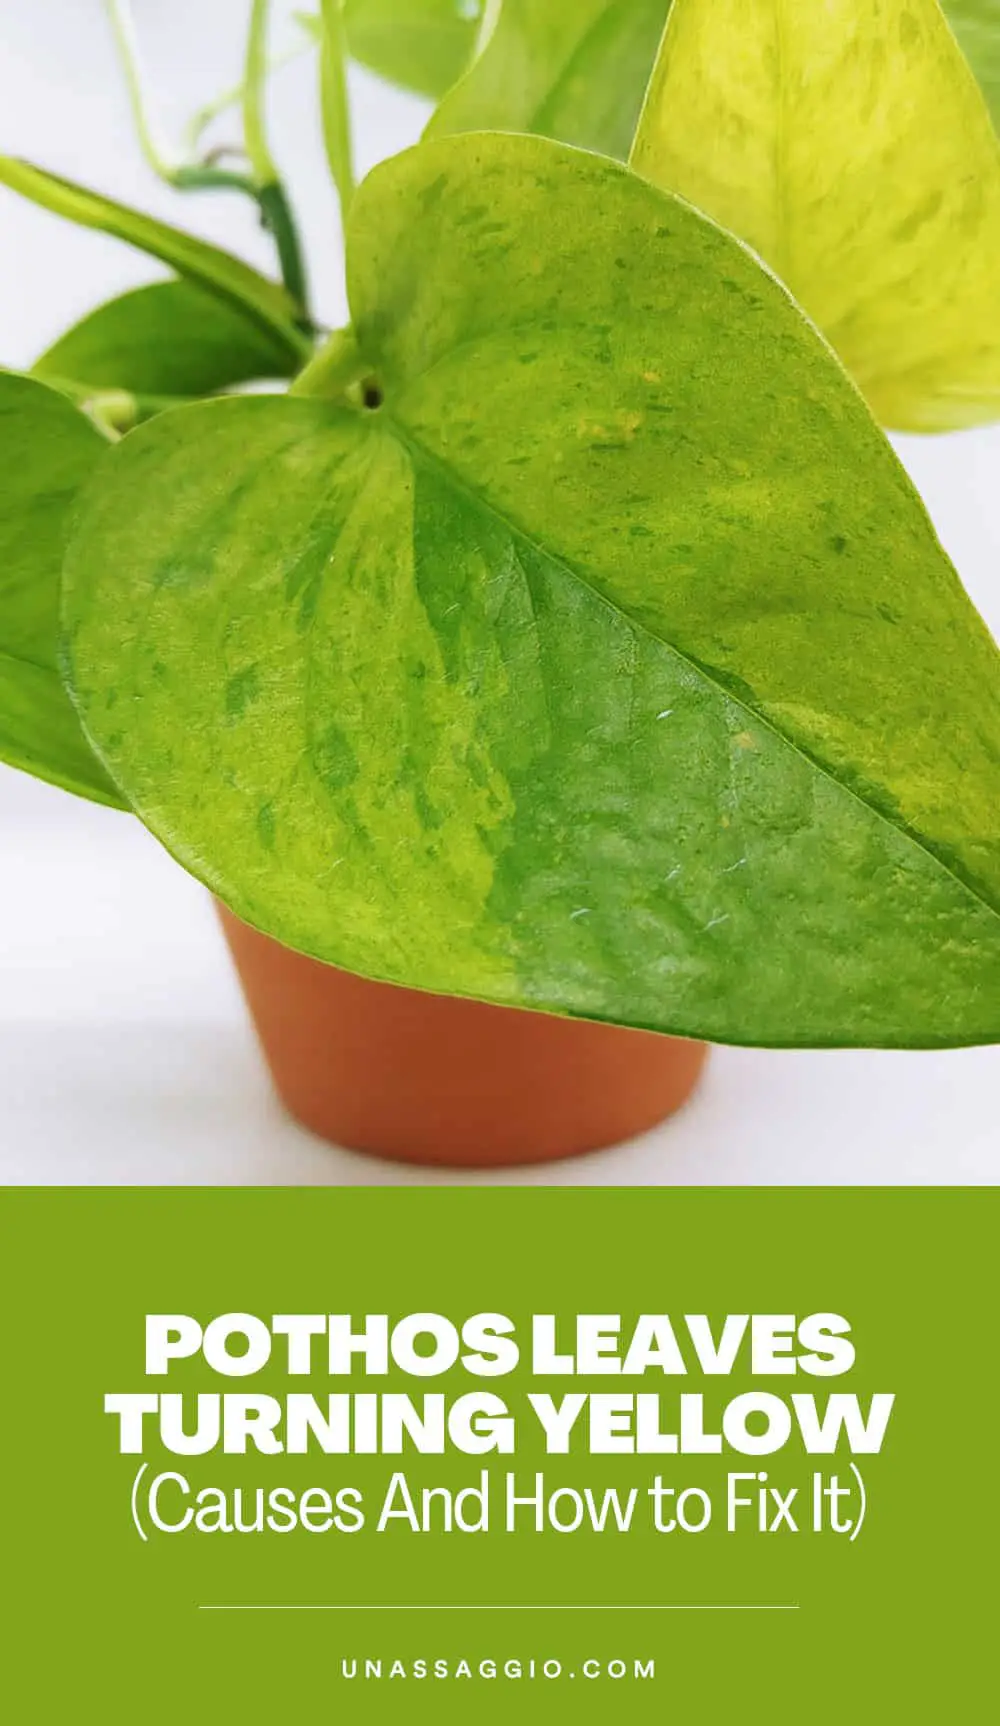 Pothos Leaves Turning Yellow (Causes And How to Fix It)